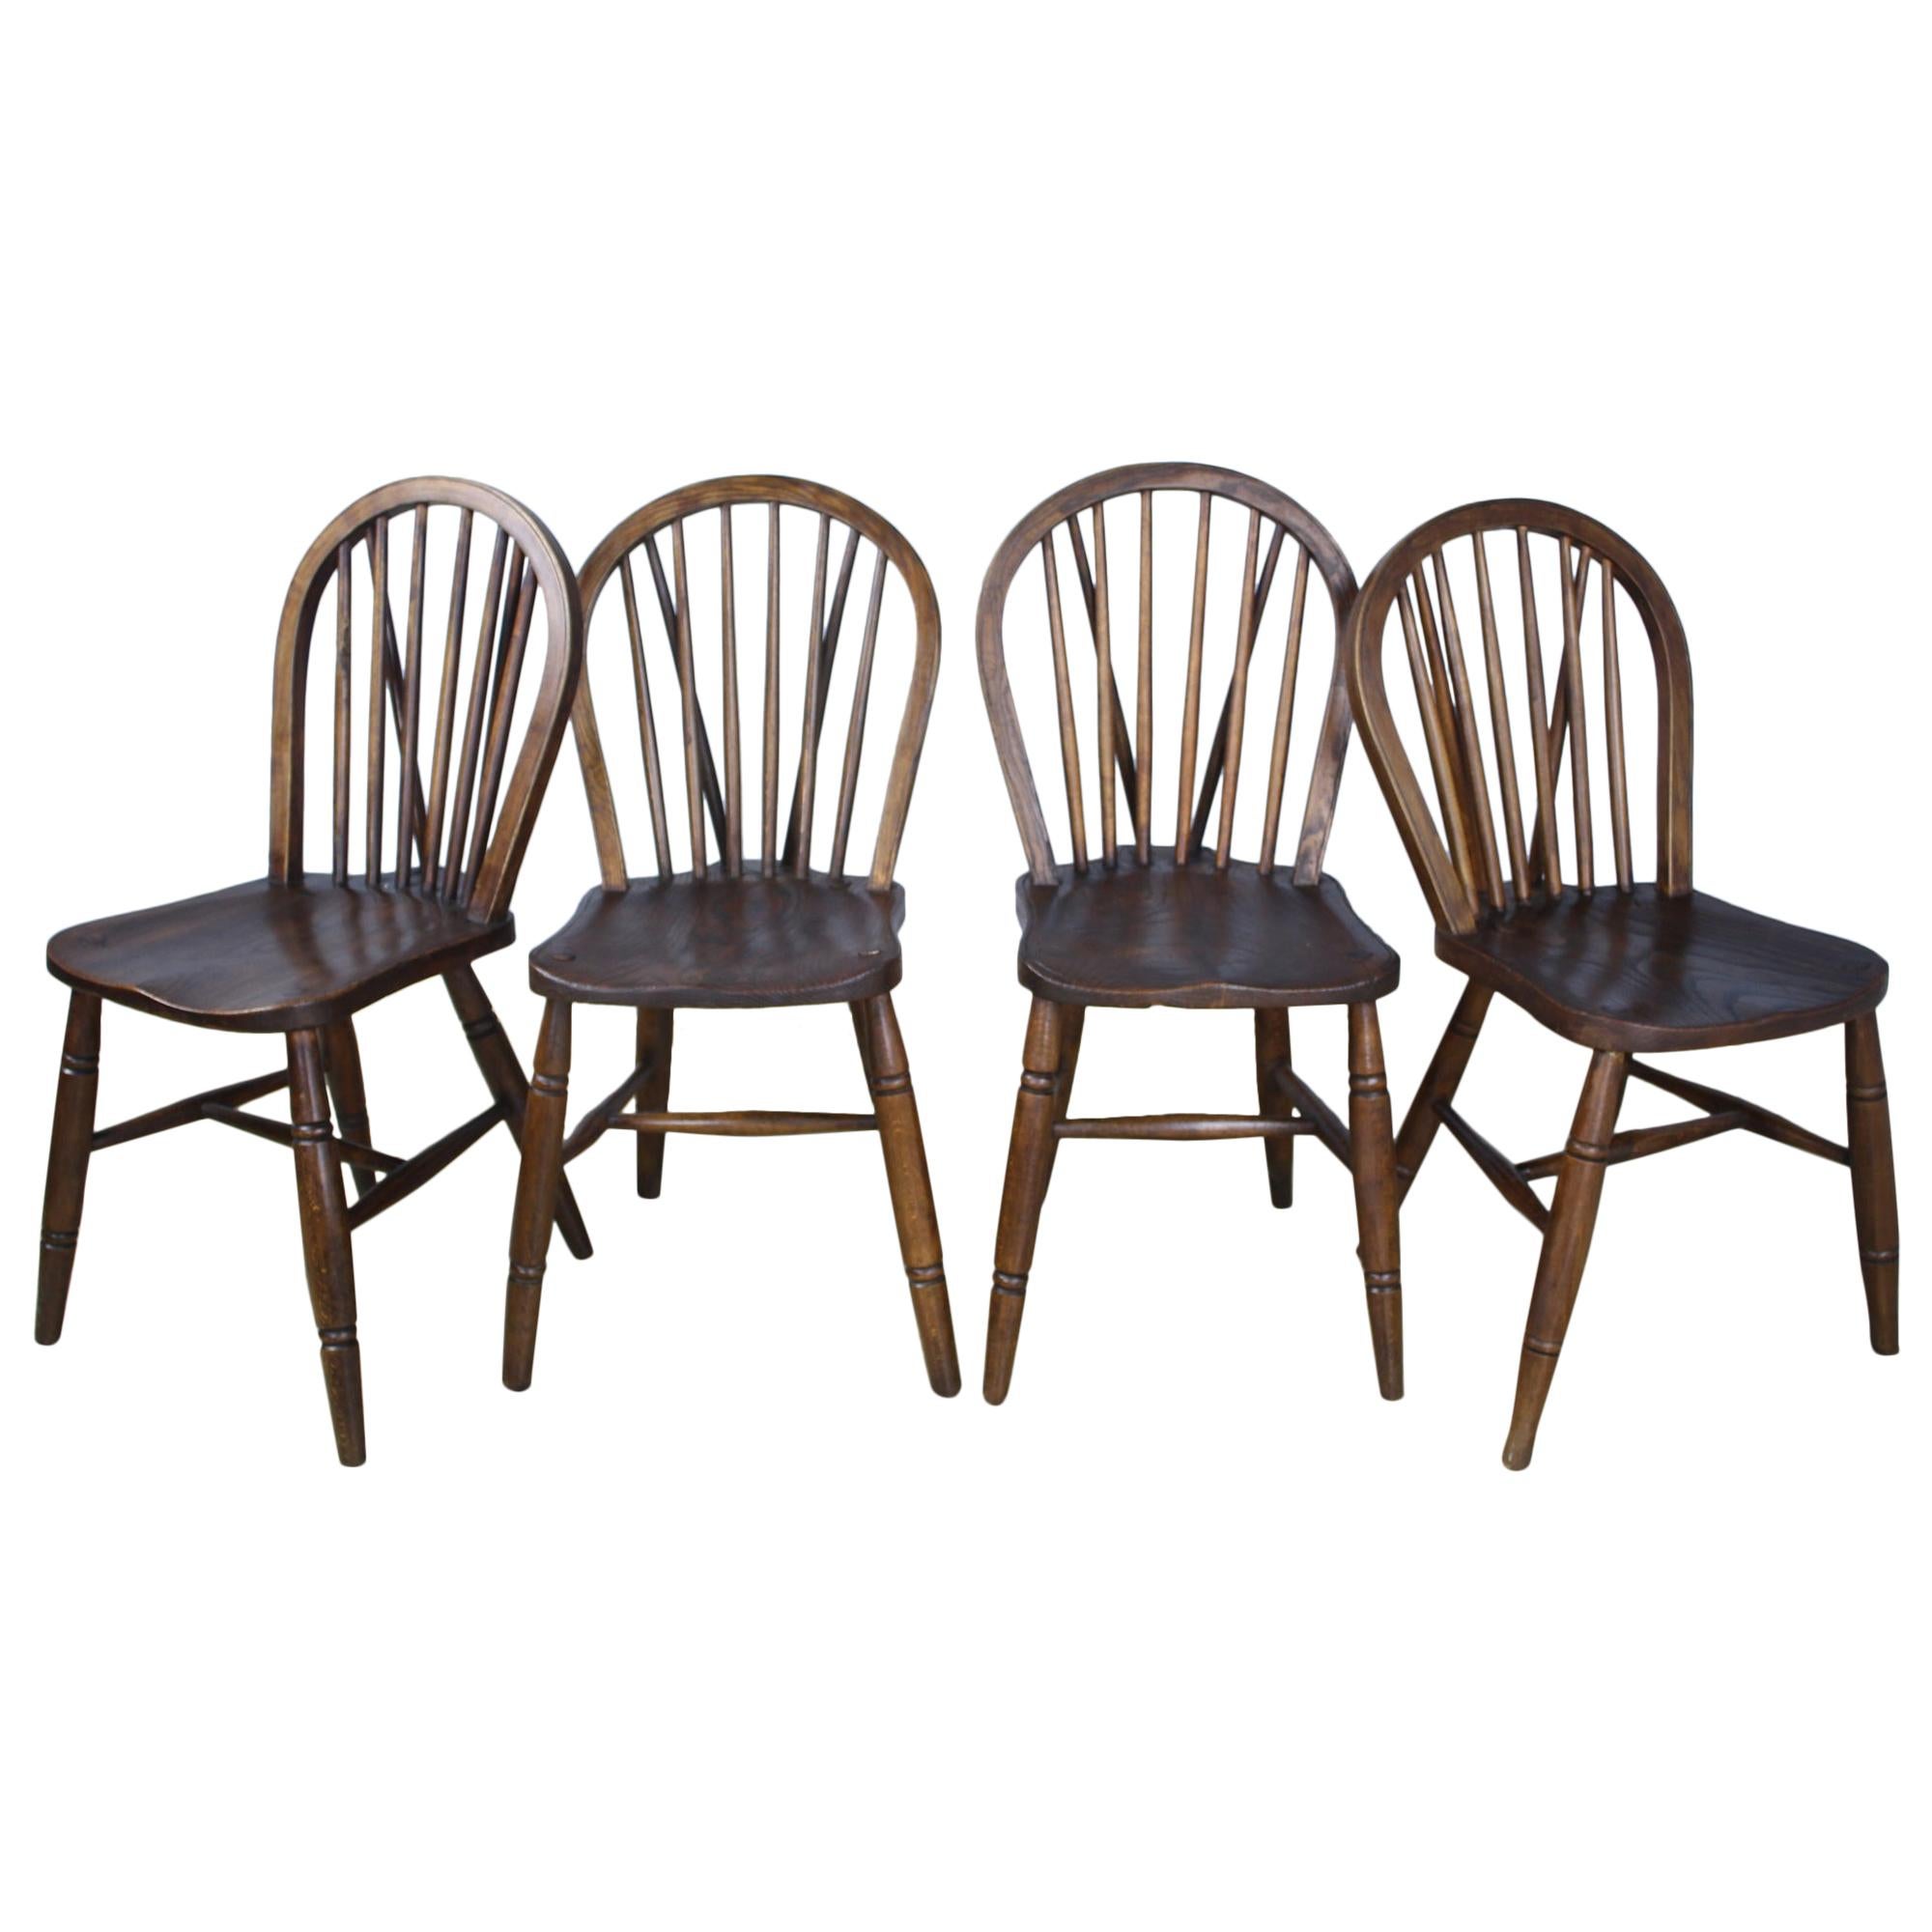 Set of Four 19th Century Elm Windsor Chairs